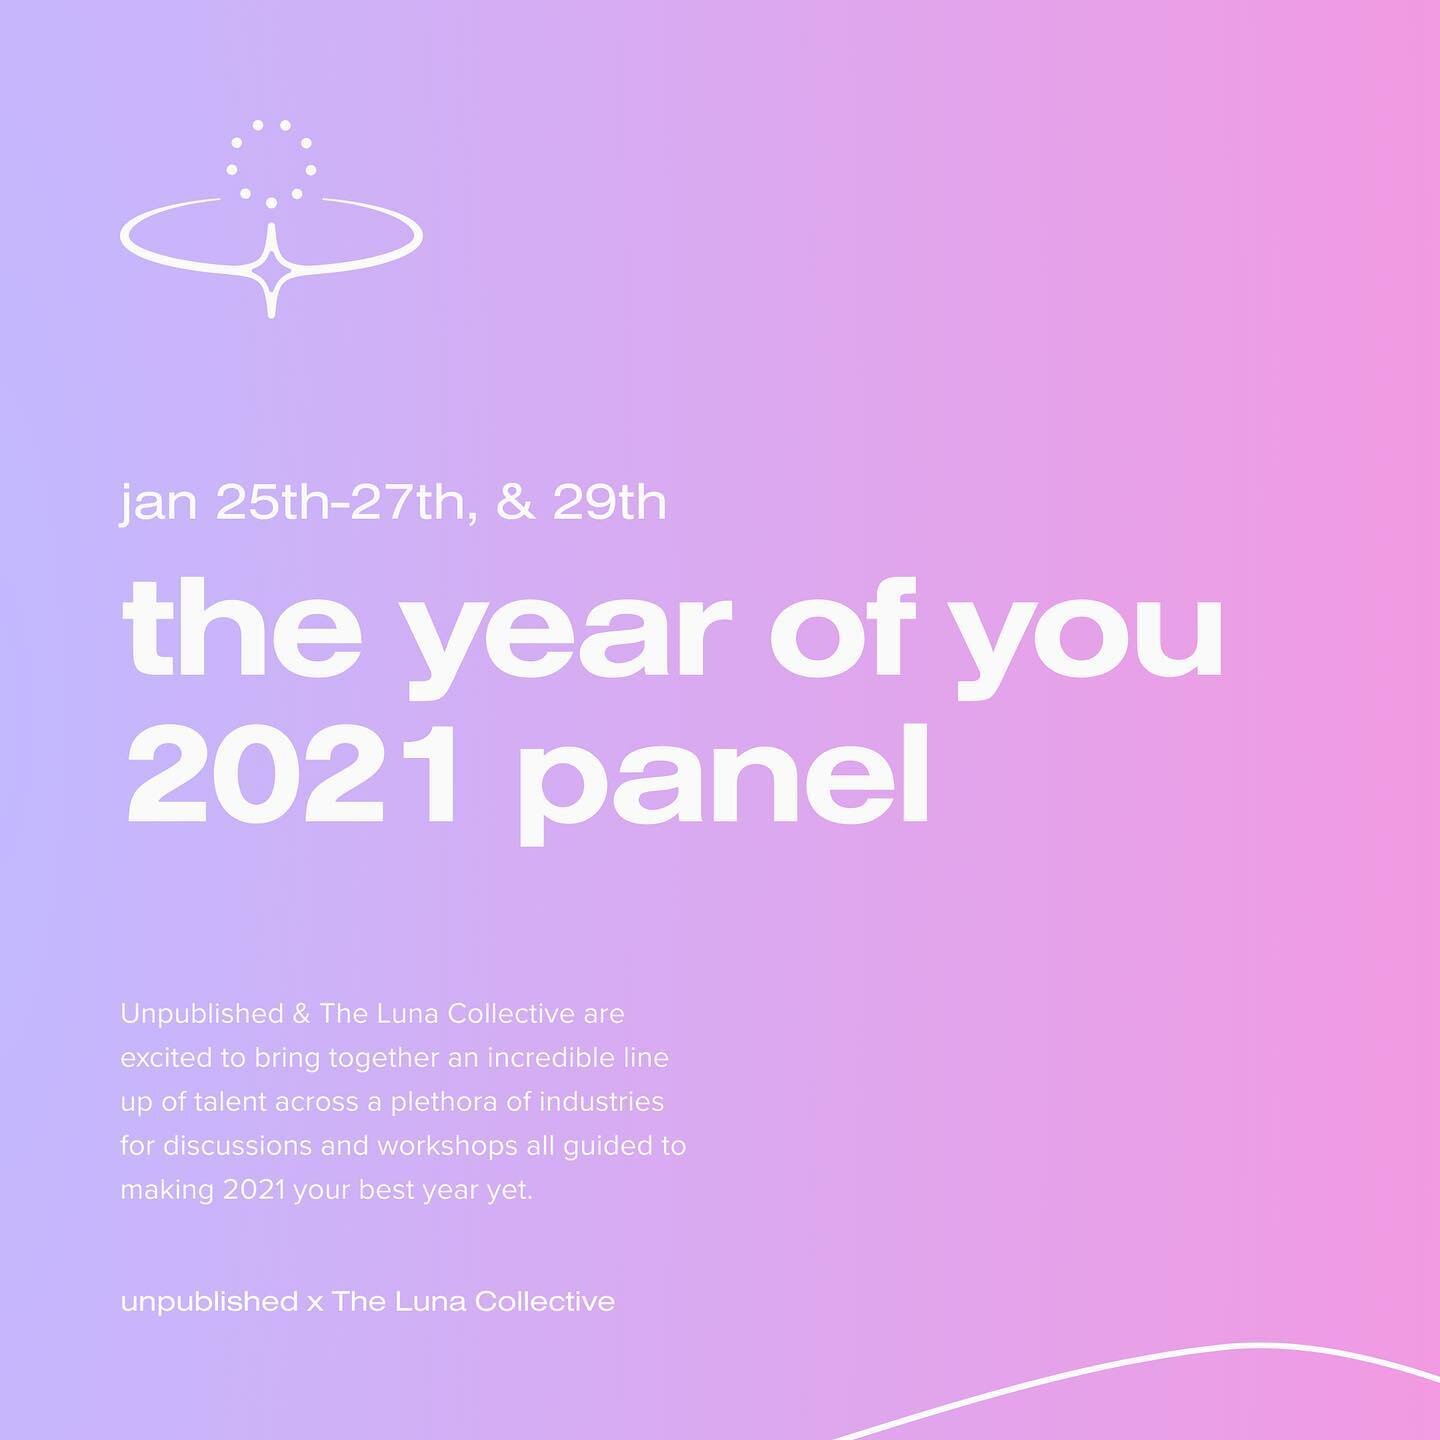 ⭐️THE YEAR OF YOU PANEL ⭐️

We&rsquo;re teaming up with our favs at Unpublished to create a special panel to kick off 2021! Tune in for some chats with amazing industry professionals &amp; FREE workshops on various creative fields ✨Make this your bes